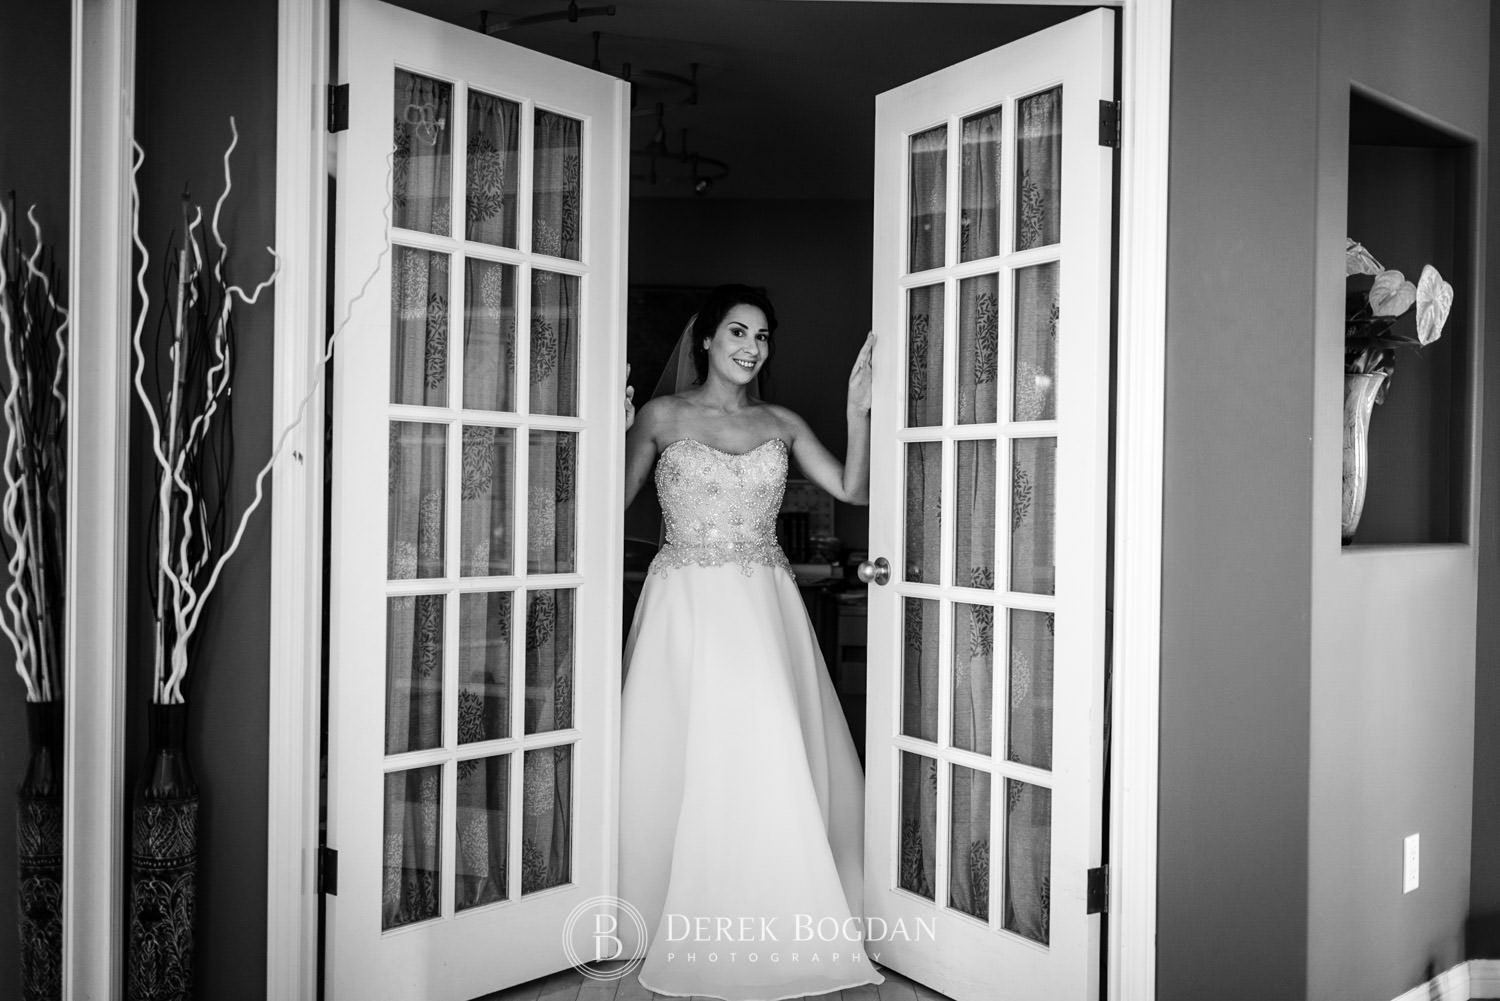 Bel Acres Golf wedding Manitoba bride getting ready portrait in home french doors